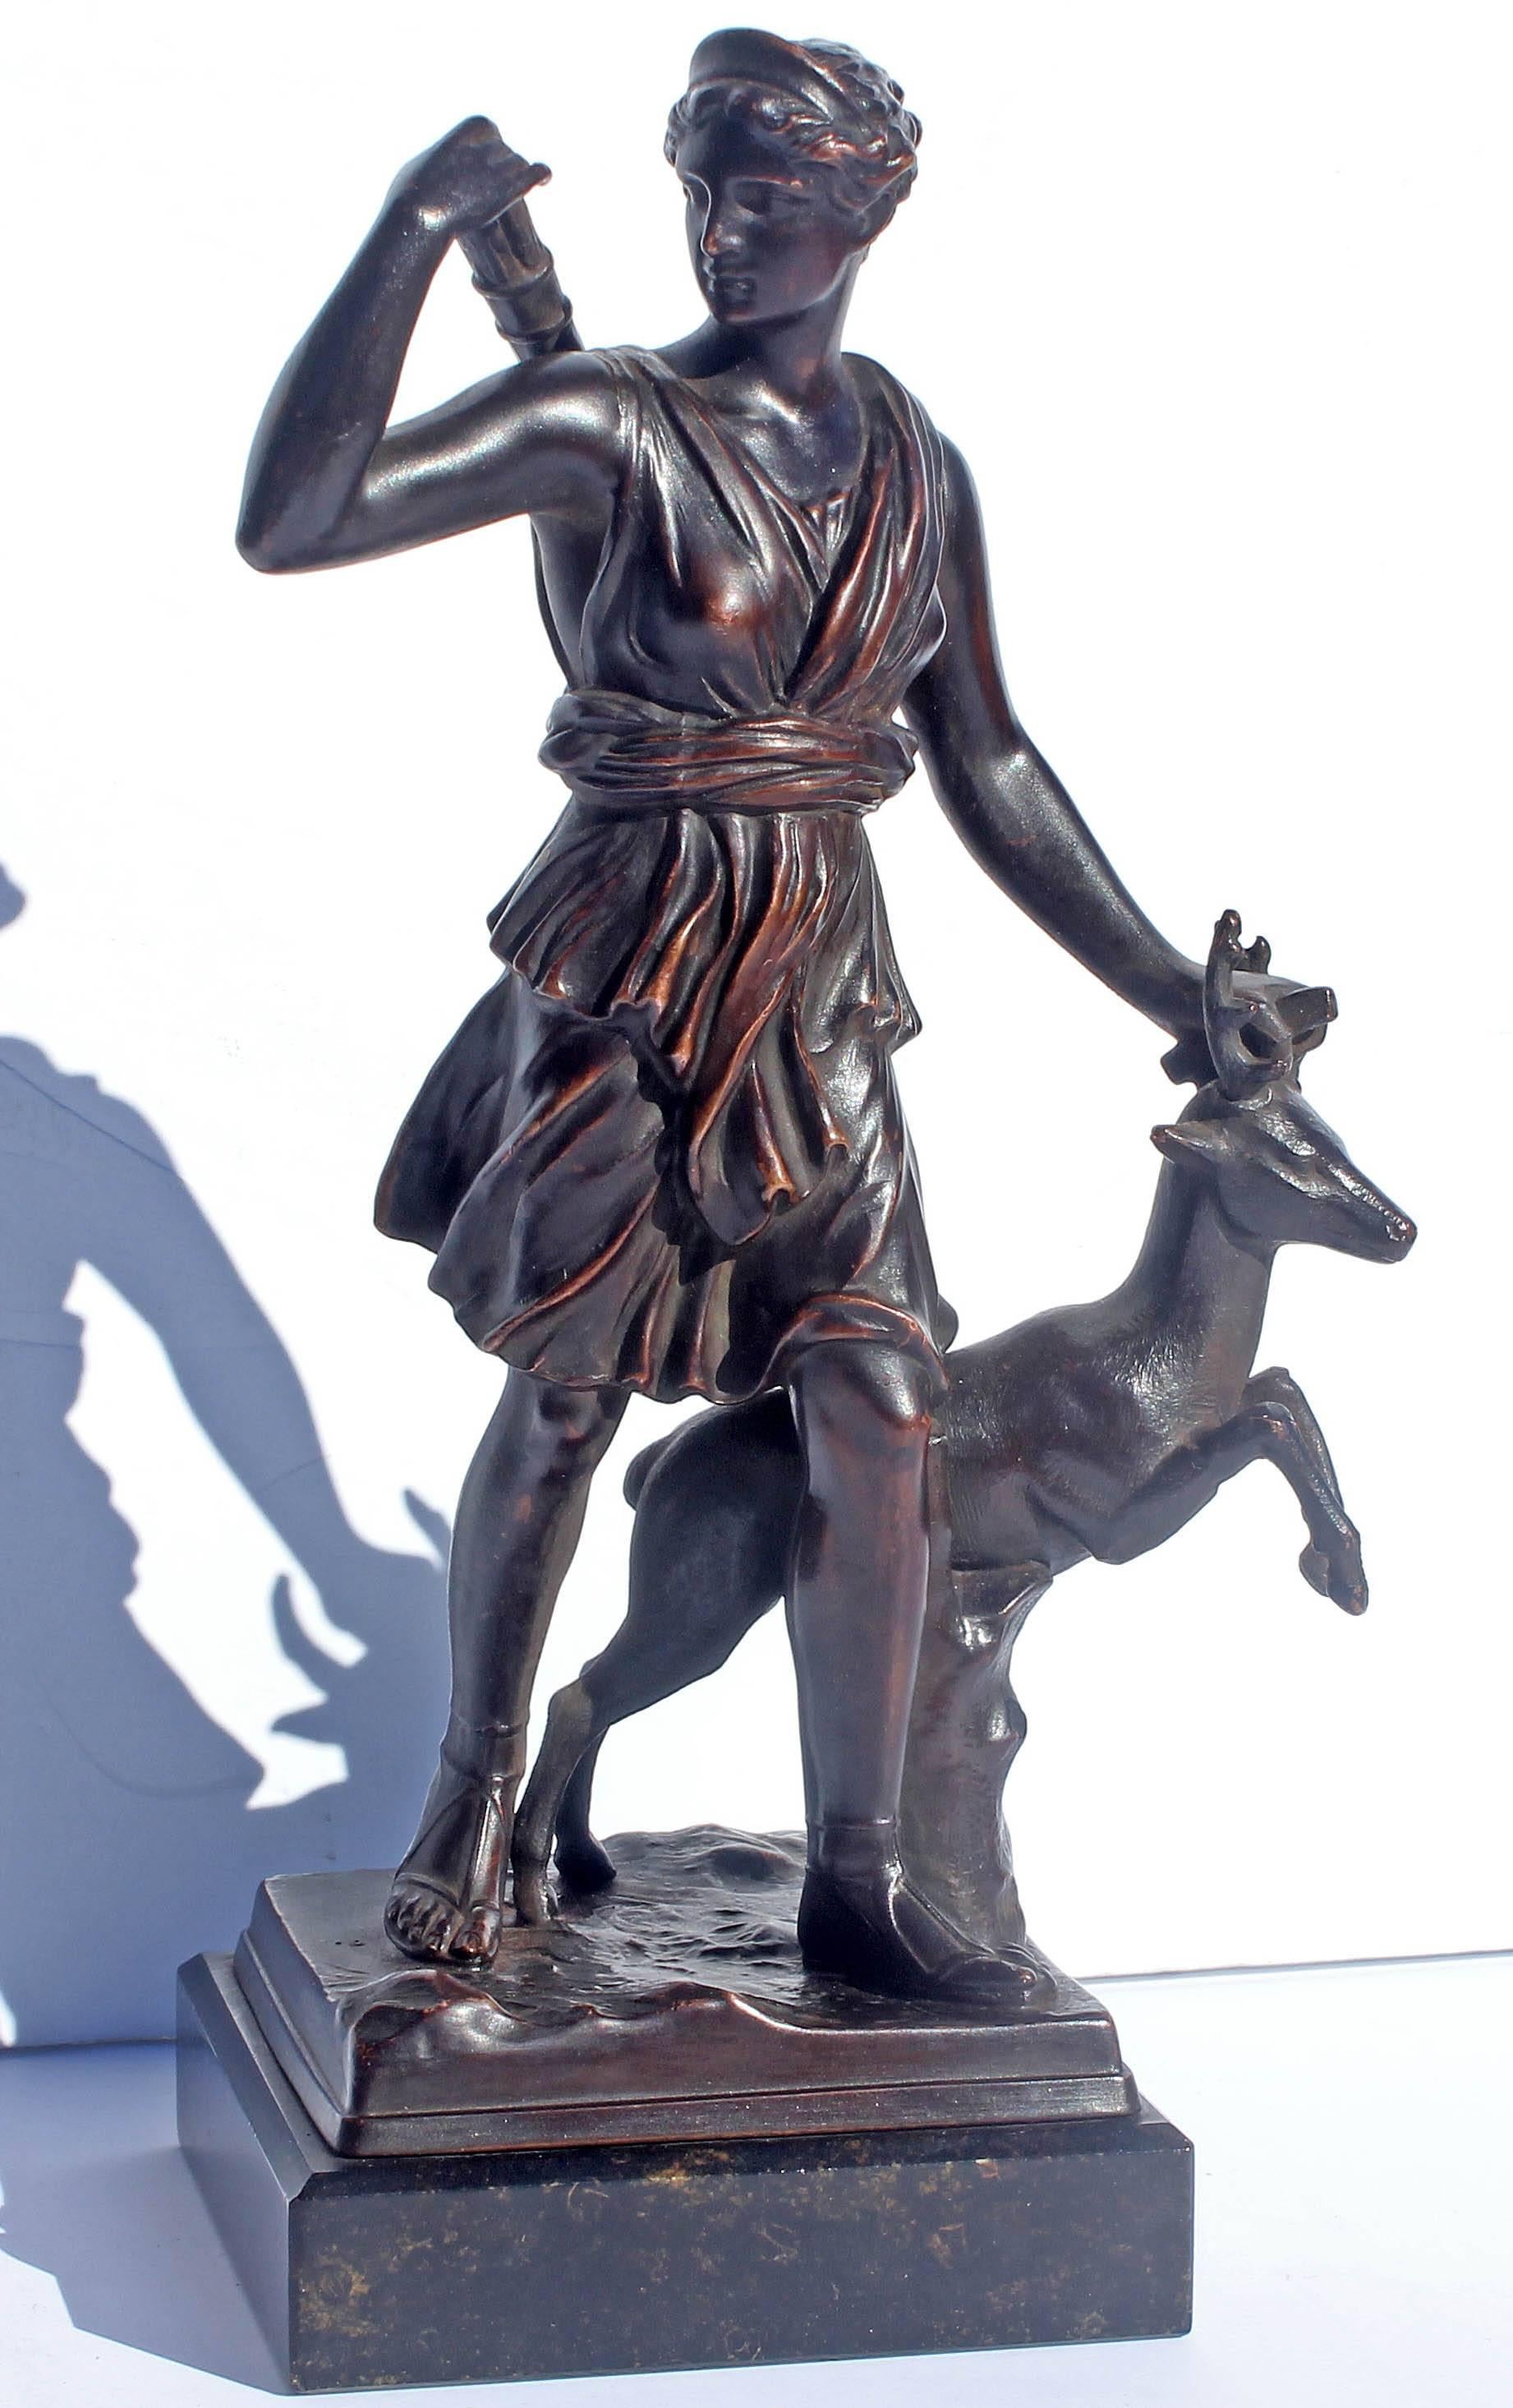 Antique bronze sculpture of Diana the Huntress after the Diana of Versailles. A 19th century Grand tour sculpture.